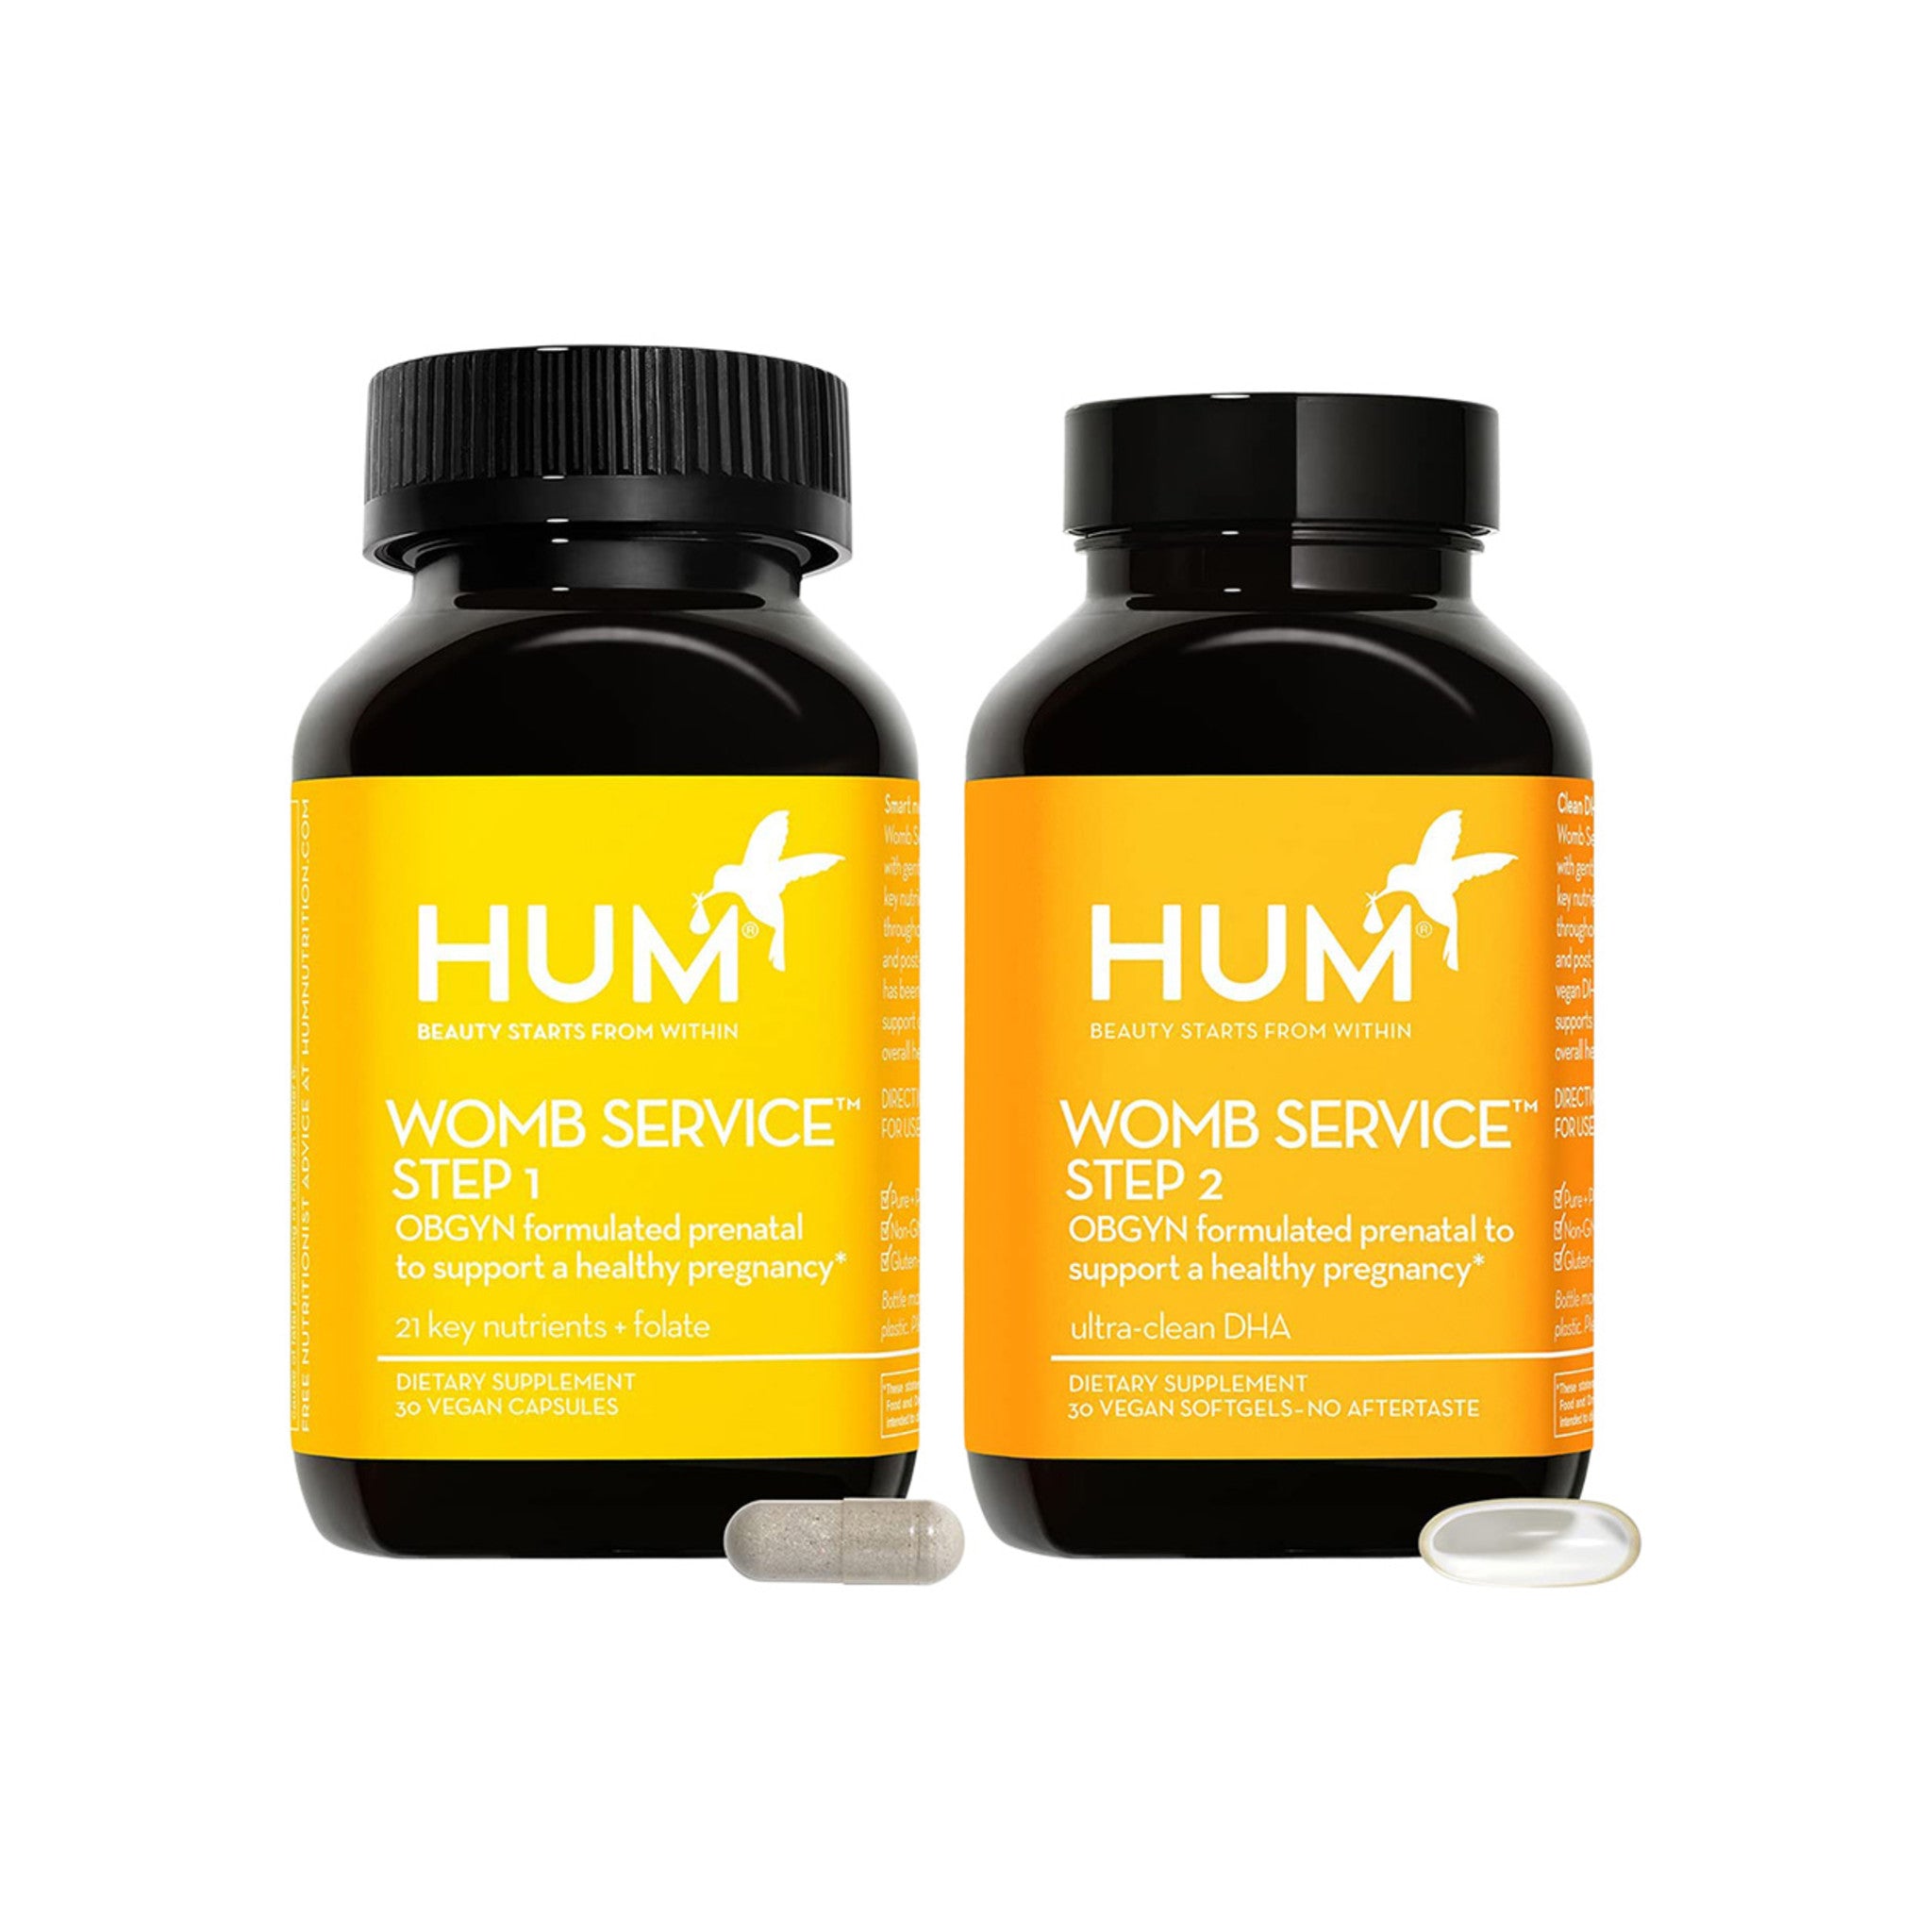 Hum Womb Service Step 1 and Step 2 Dietary Supplements main image.